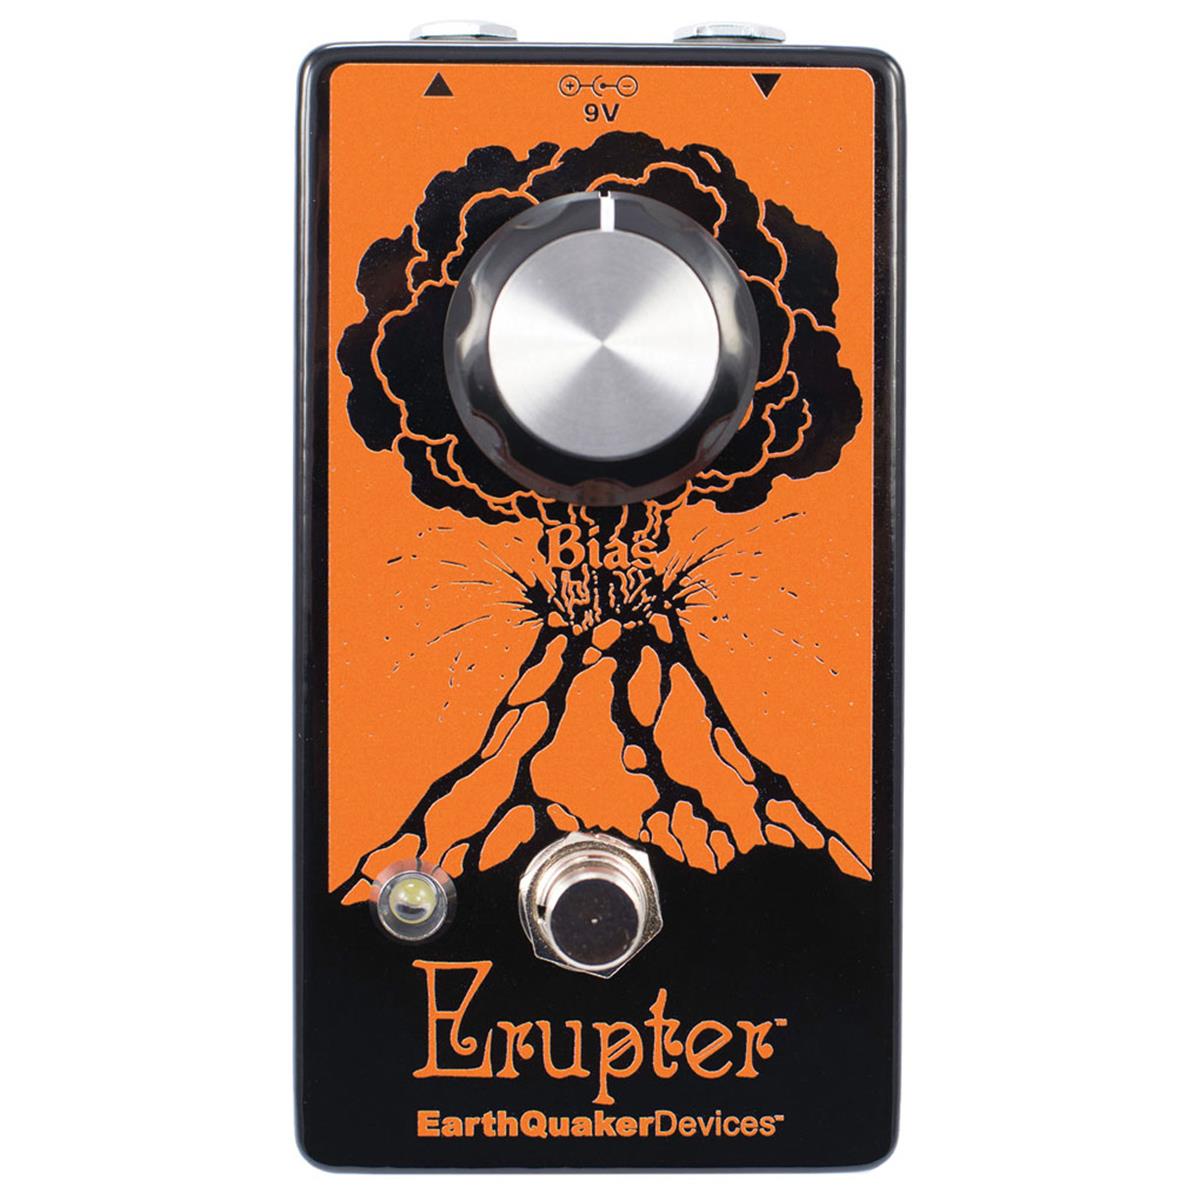 Image of Earthquaker Devices EarthQuaker Devices Erupter Ultimate Fuzz Tone Pedal